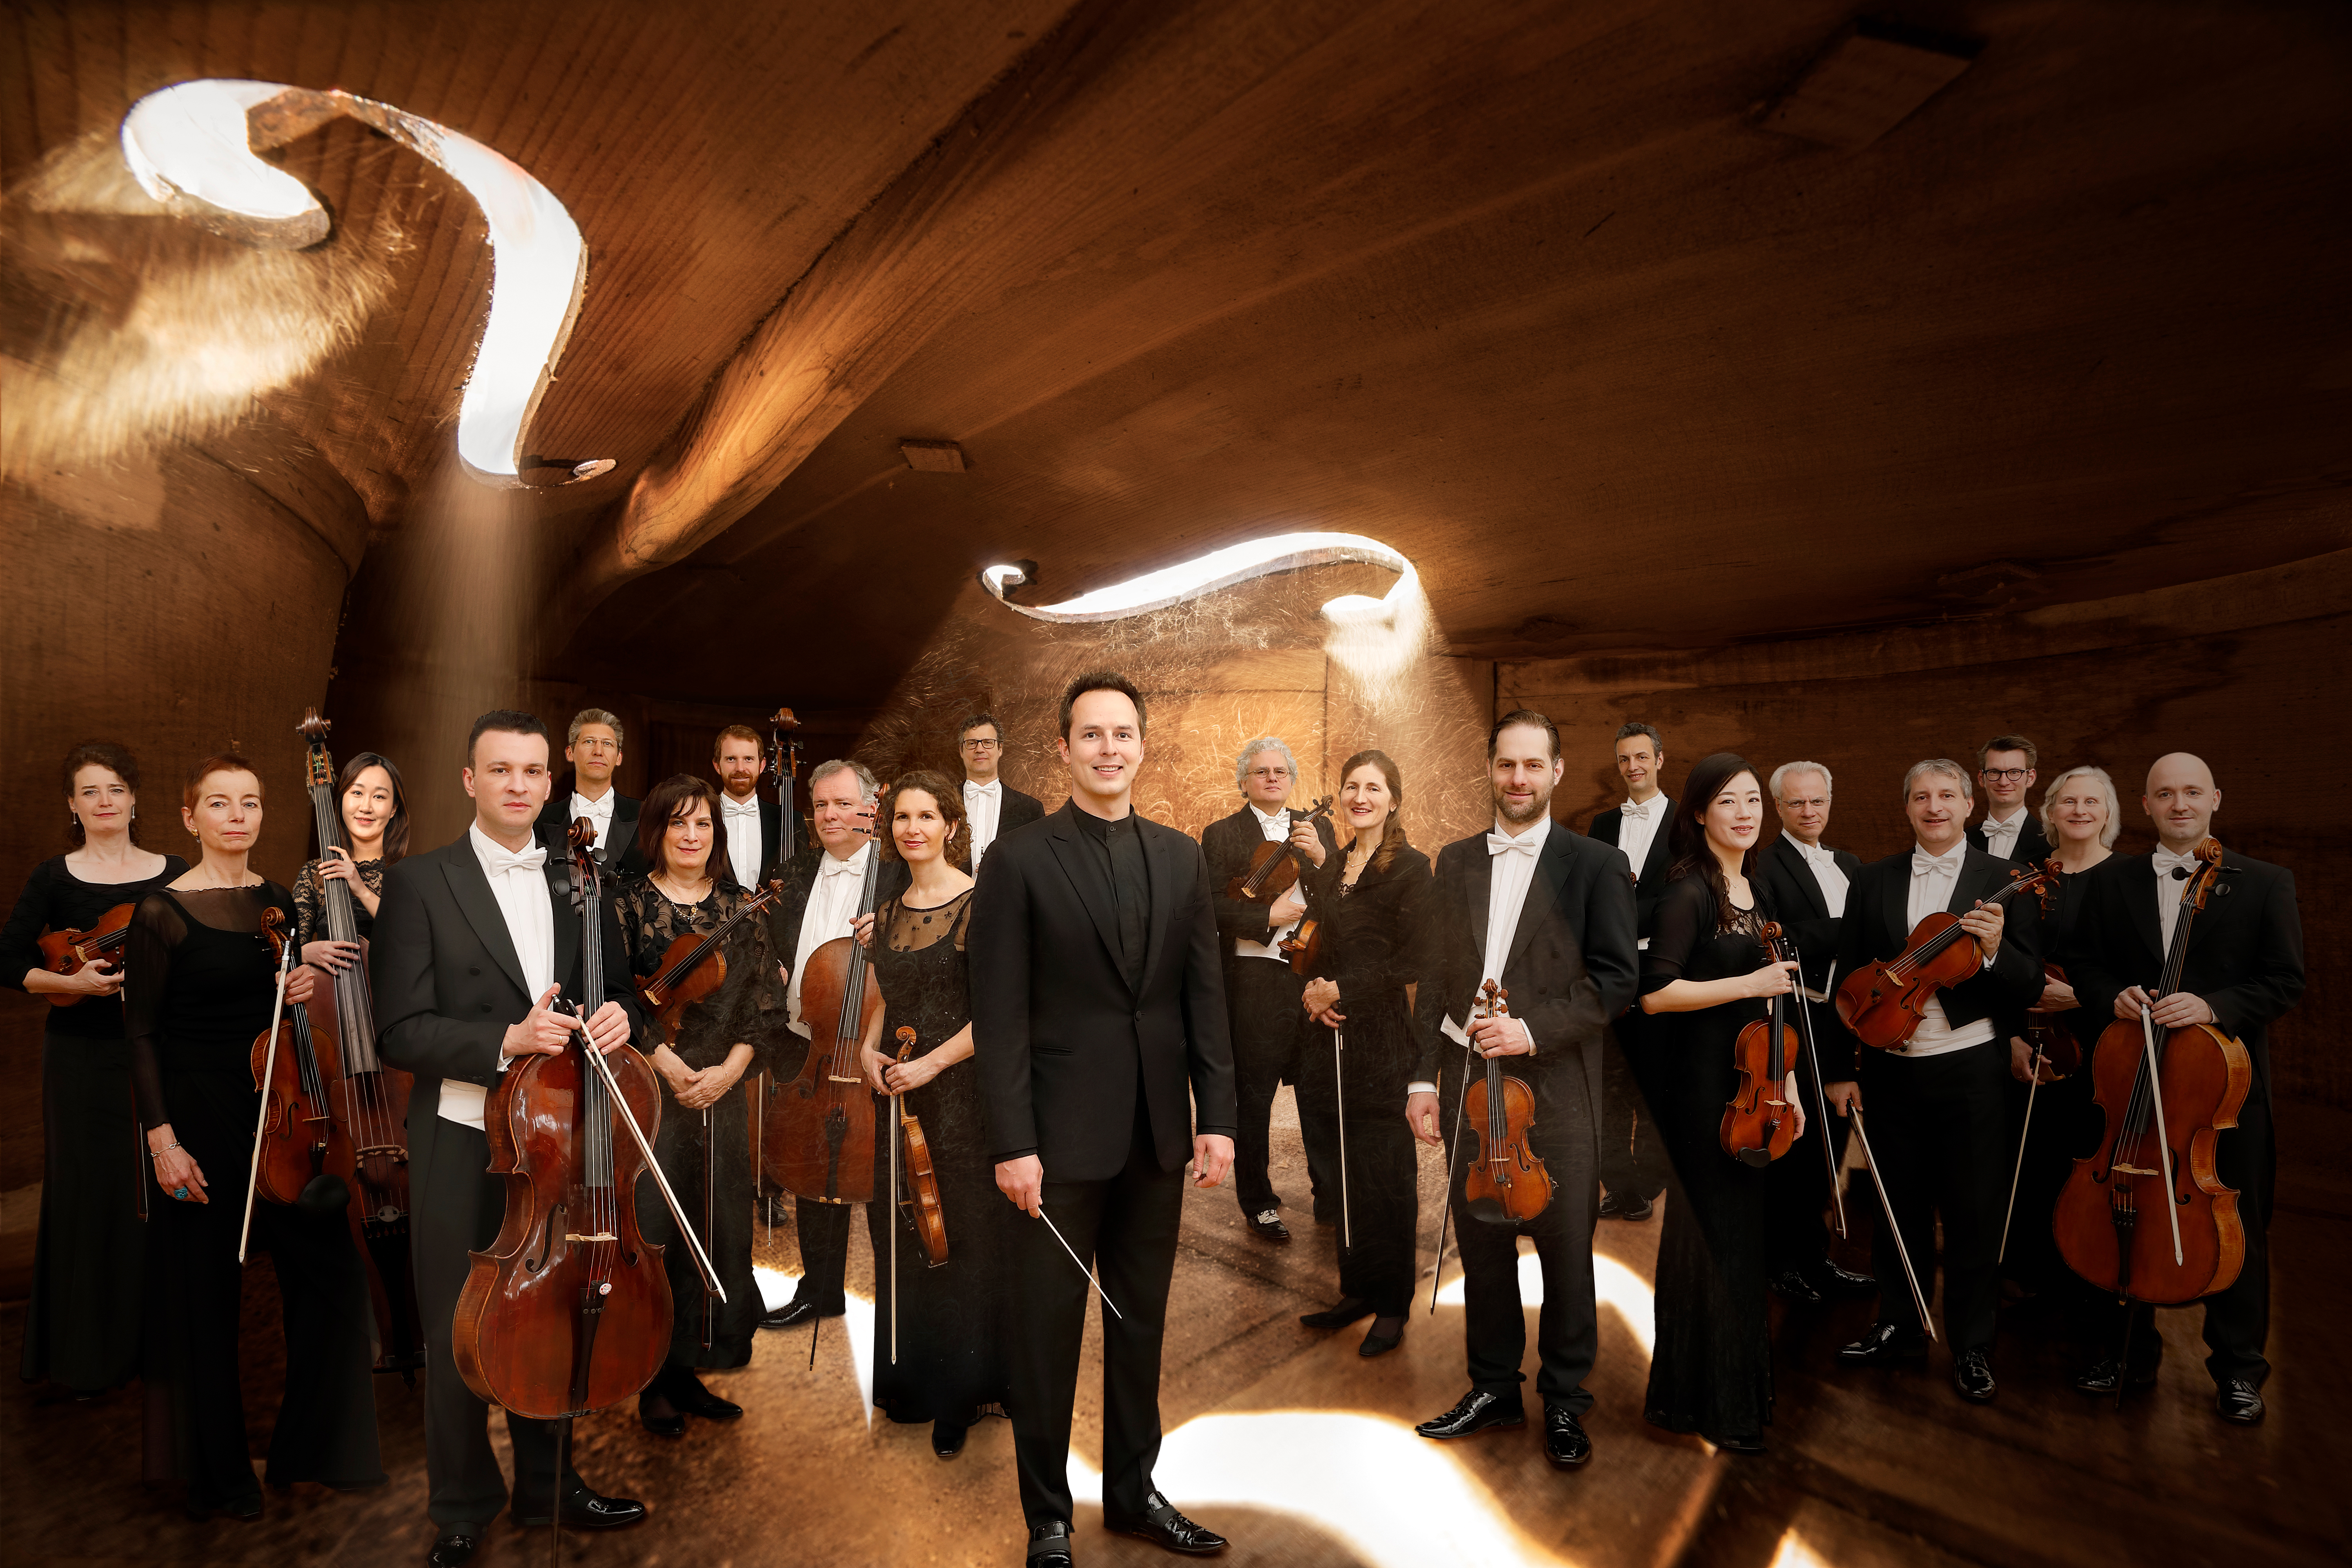 Württemberg Chamber Orchestra Heilbronn will perform works of Bach and more.